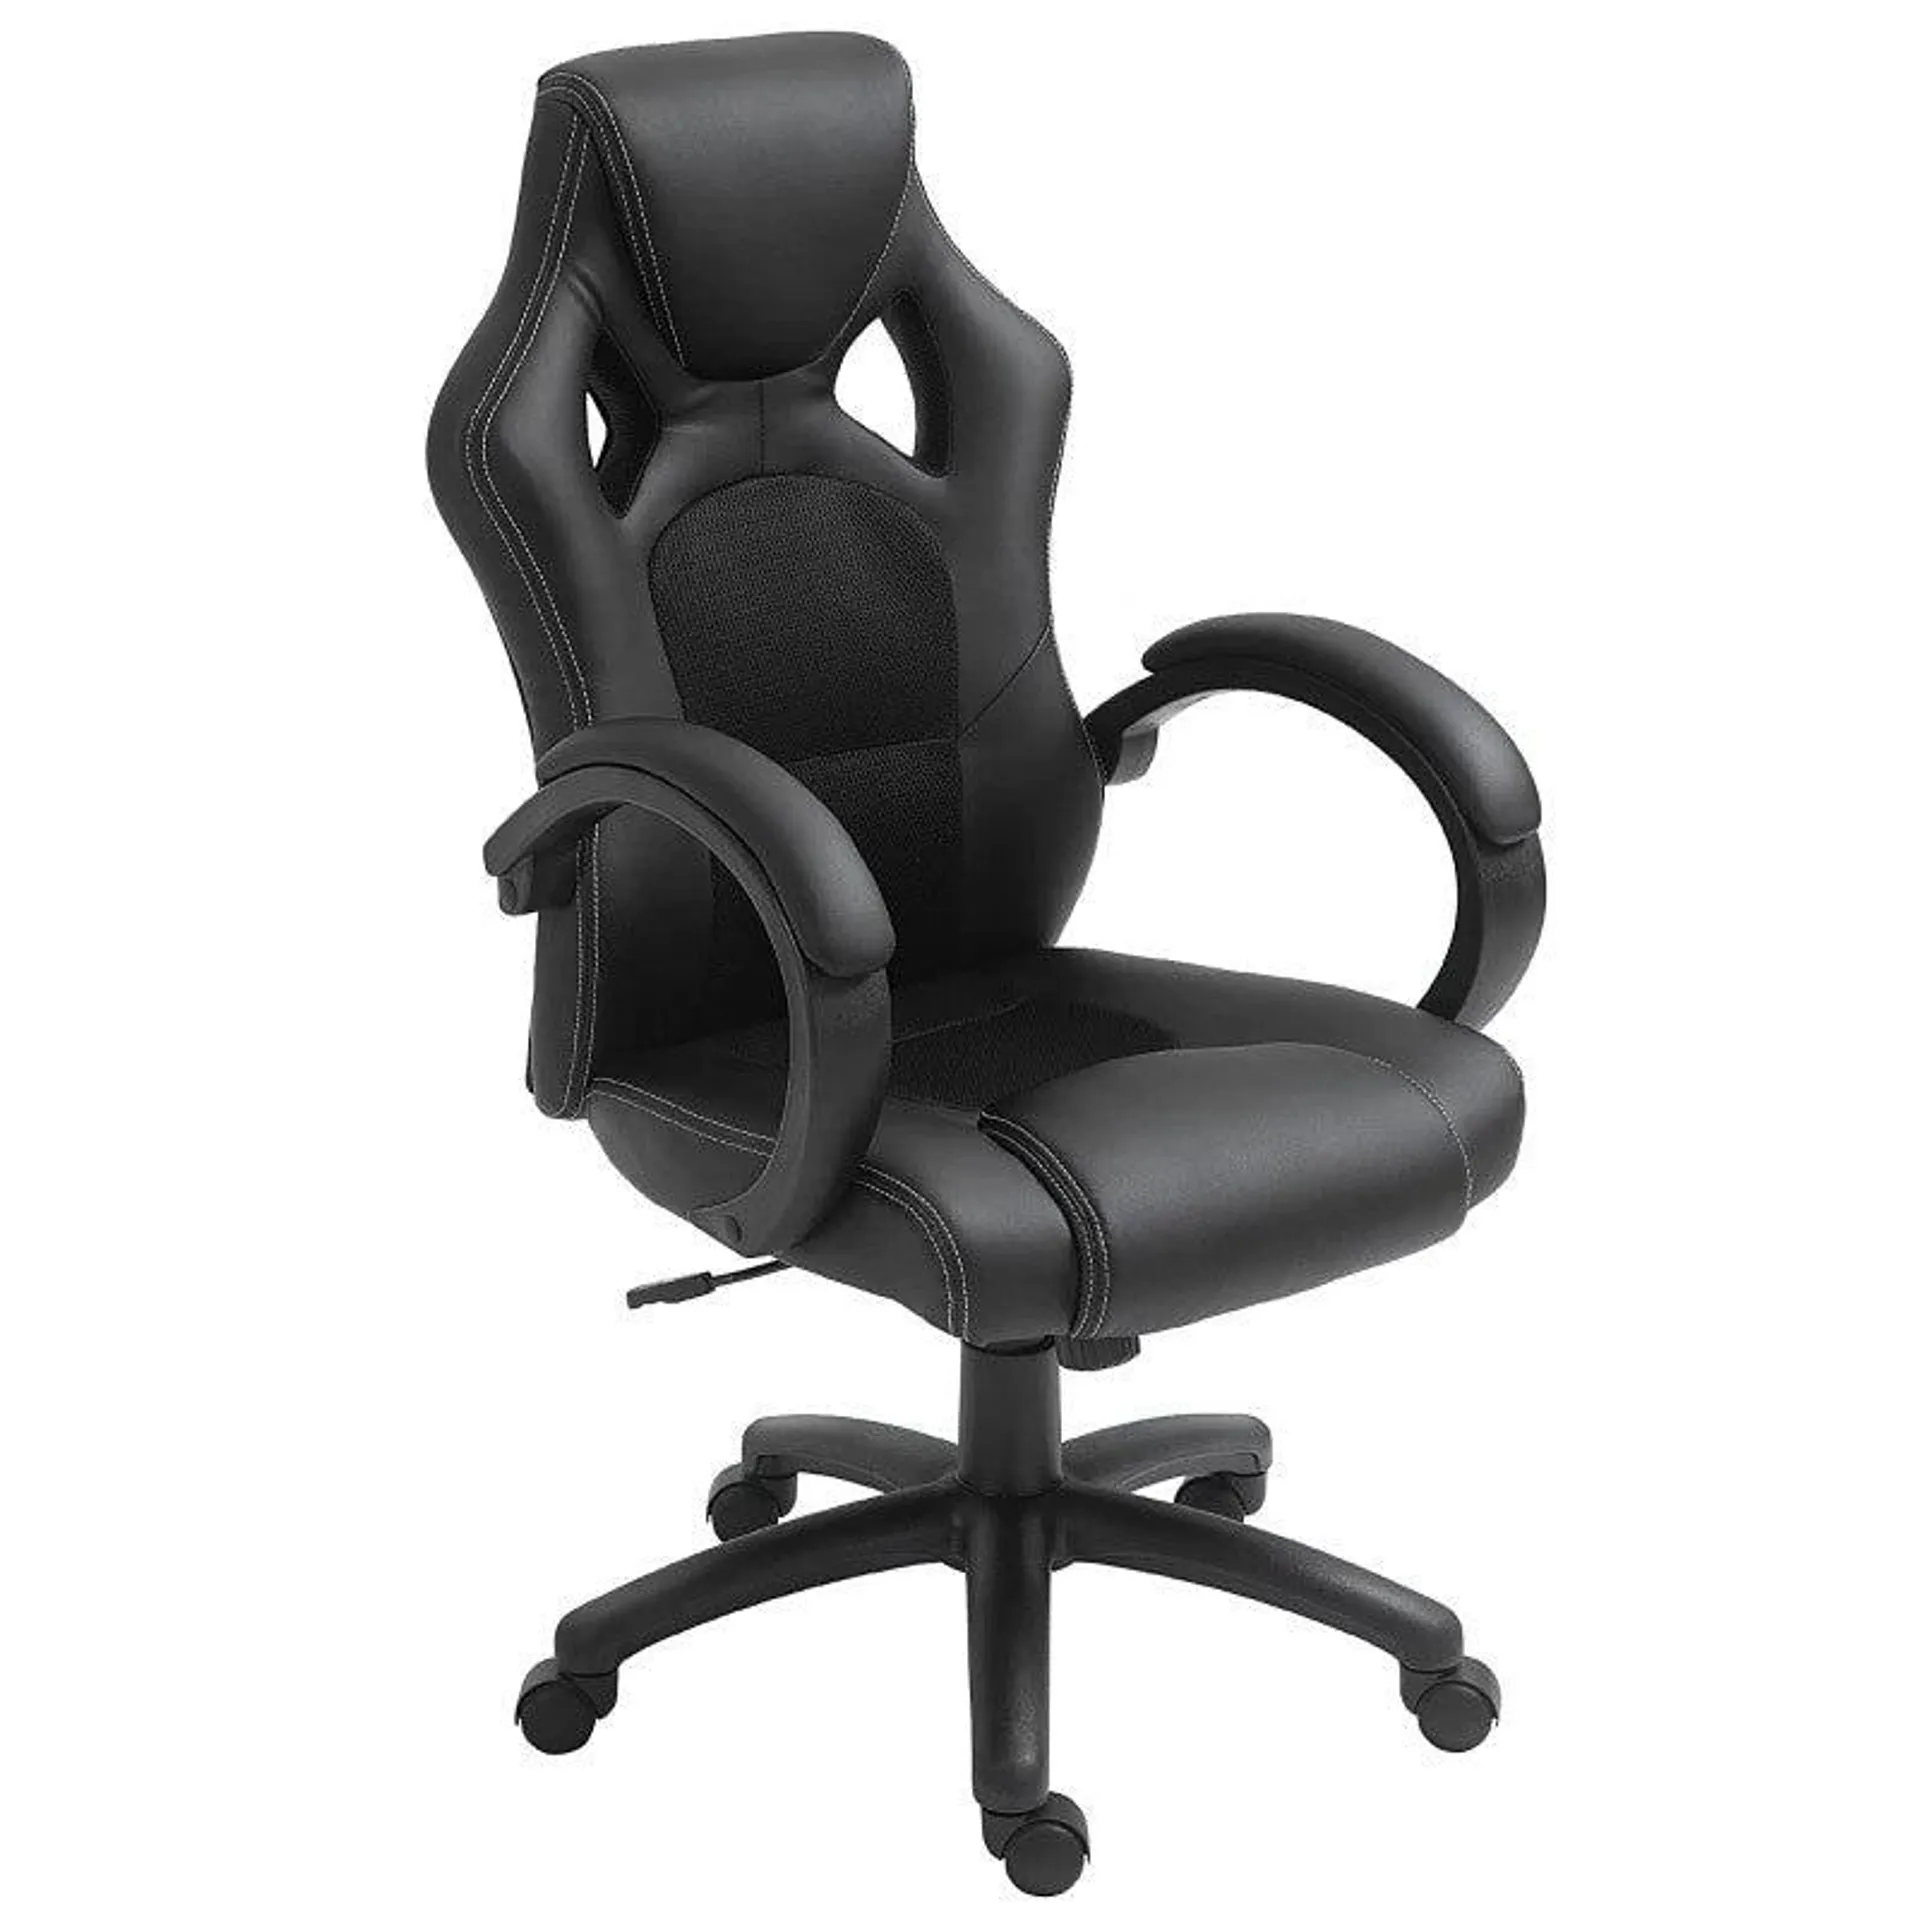 Maplin Plus Faux Leather High-Back Adjustable Gaming Chair